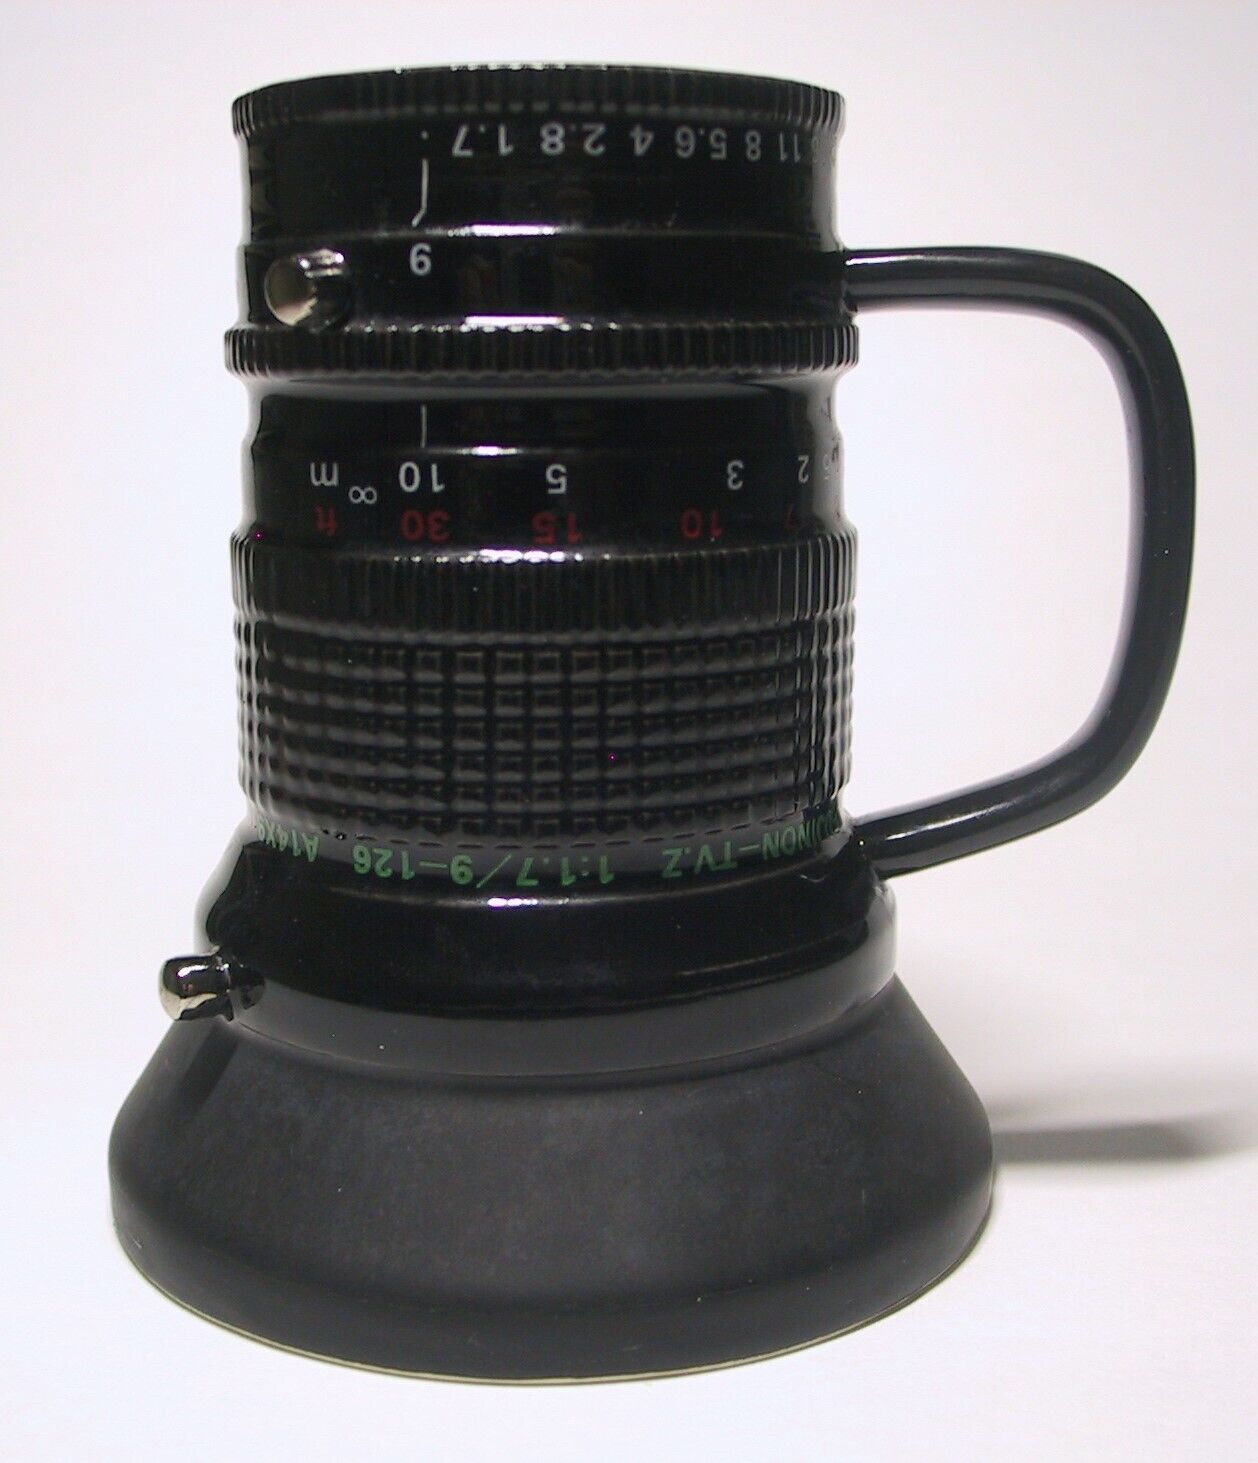 Vintage Fujinon TV Camera Lens Promotional Coffee Mug from early 1980s